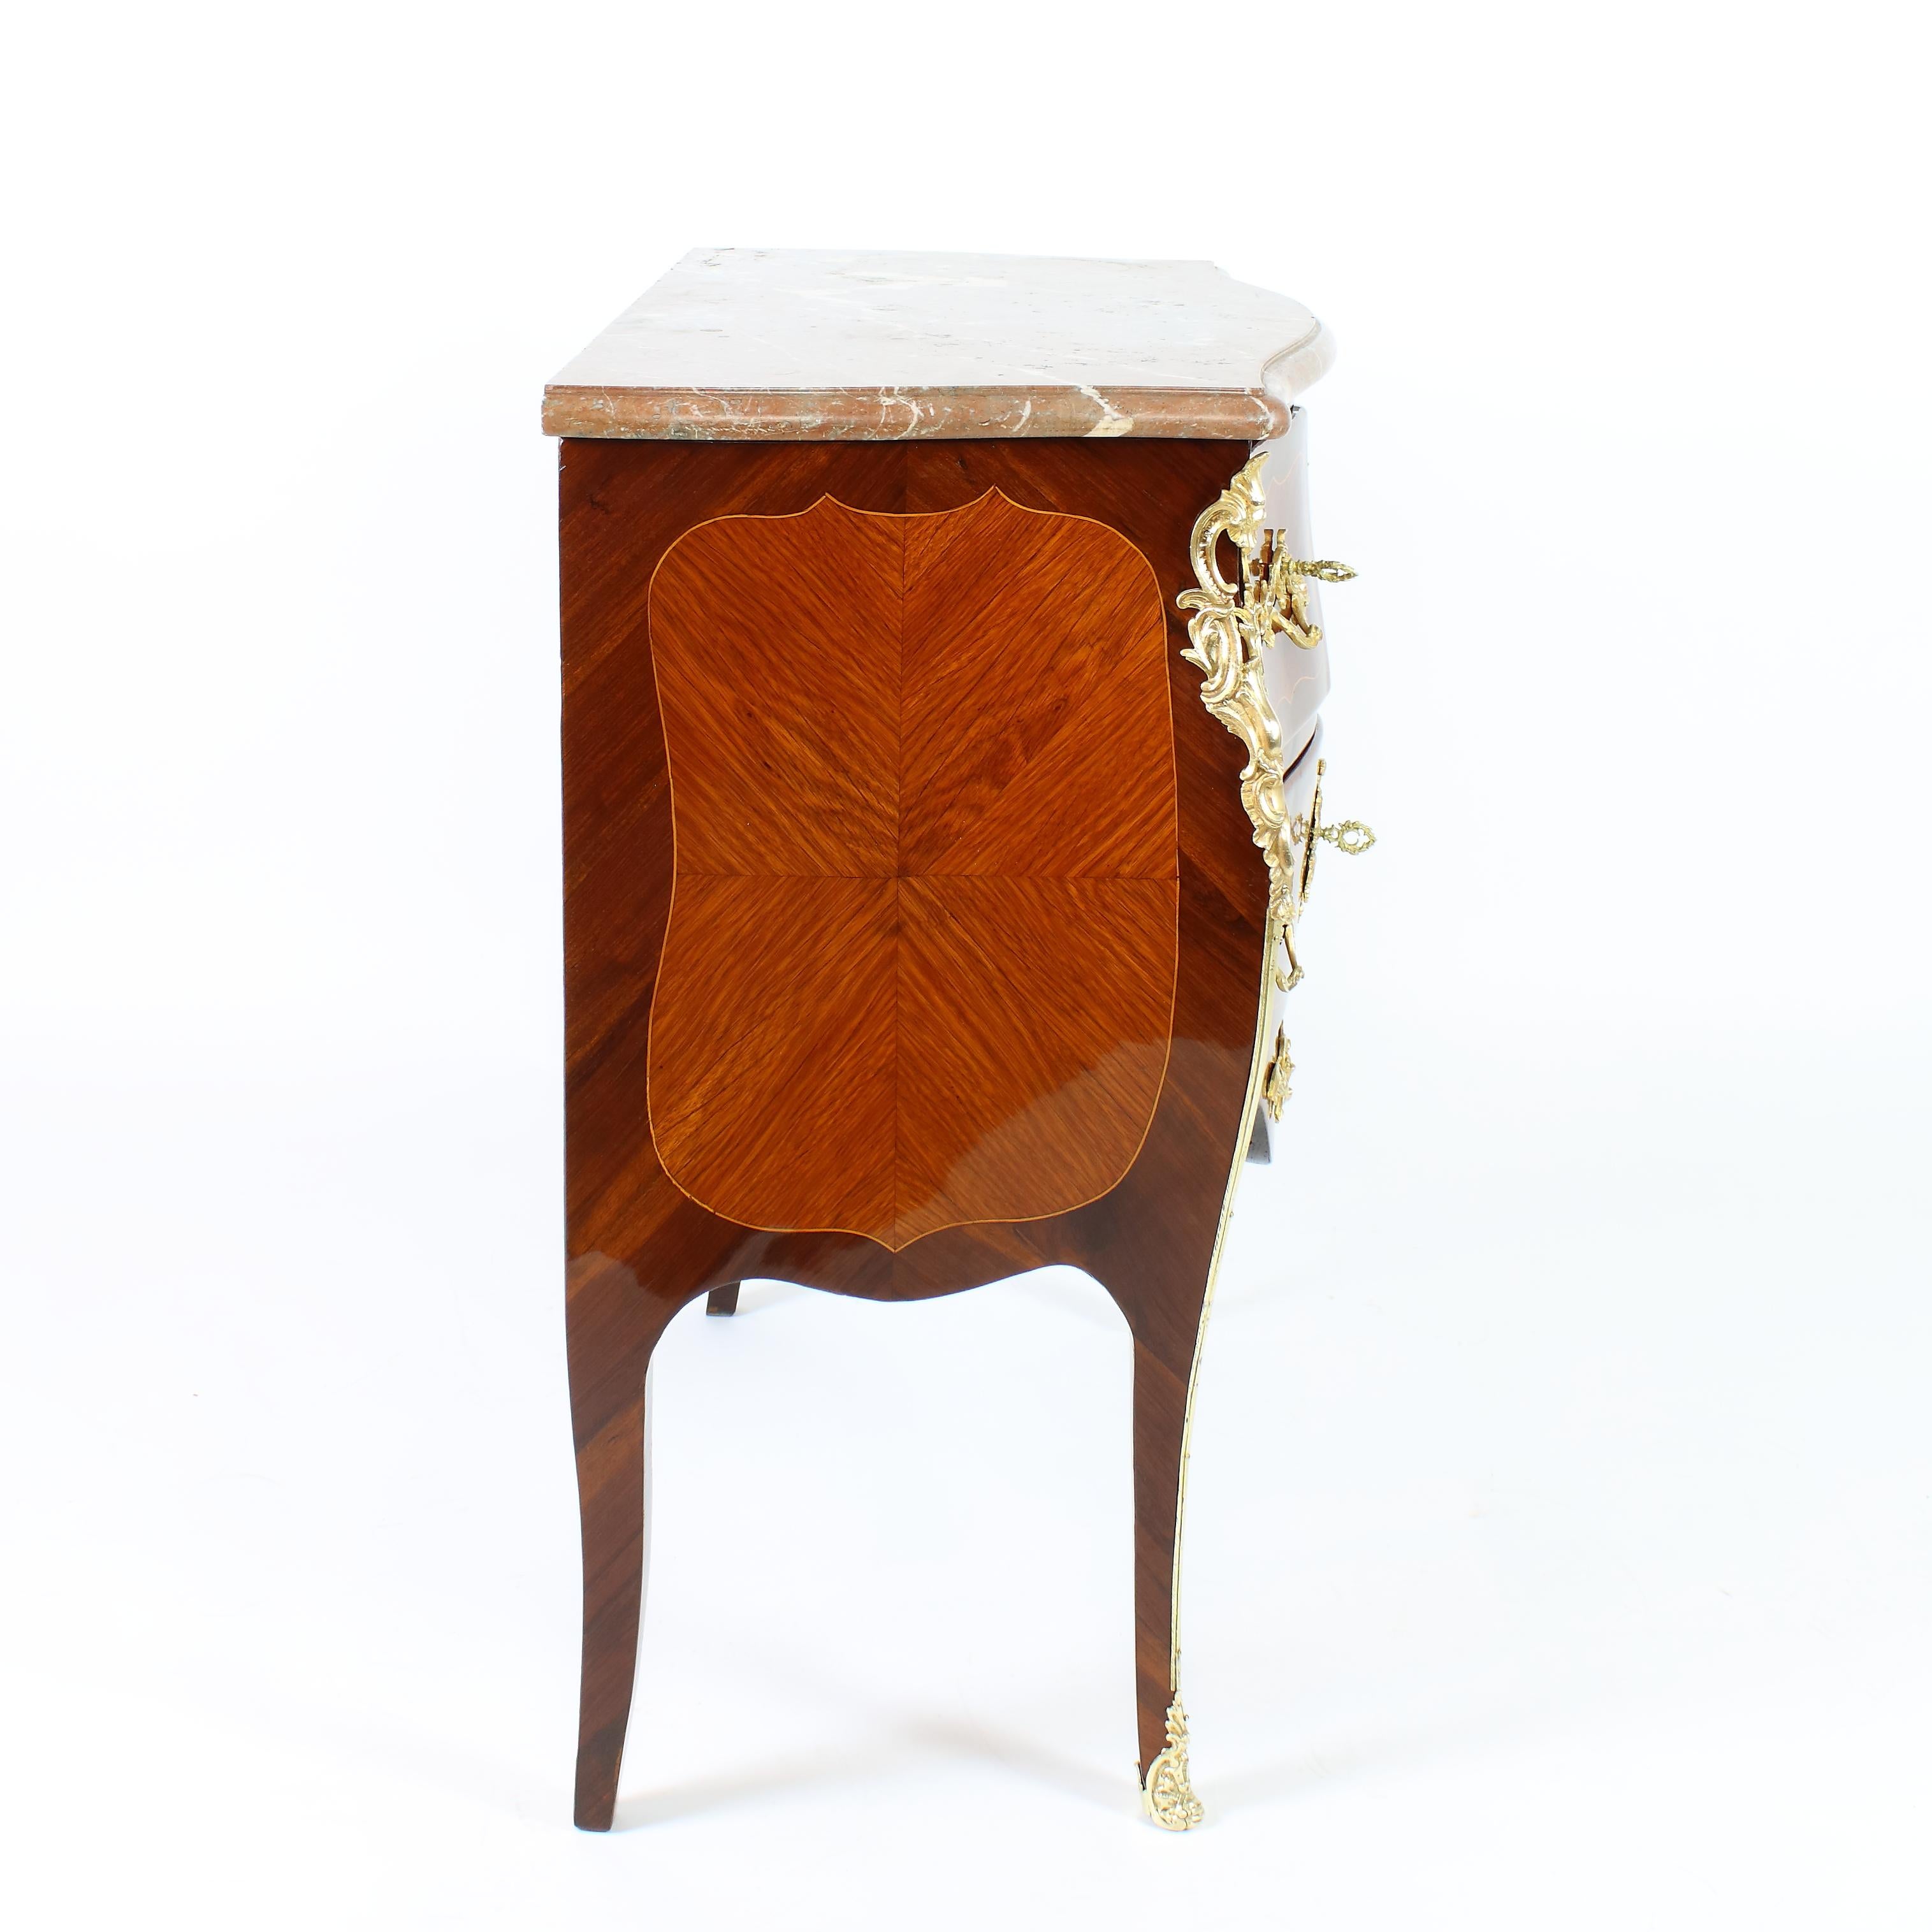 Gilt 18th Century Small Louis XV Marquetry Bombé Shaped Commode or Sauteuse